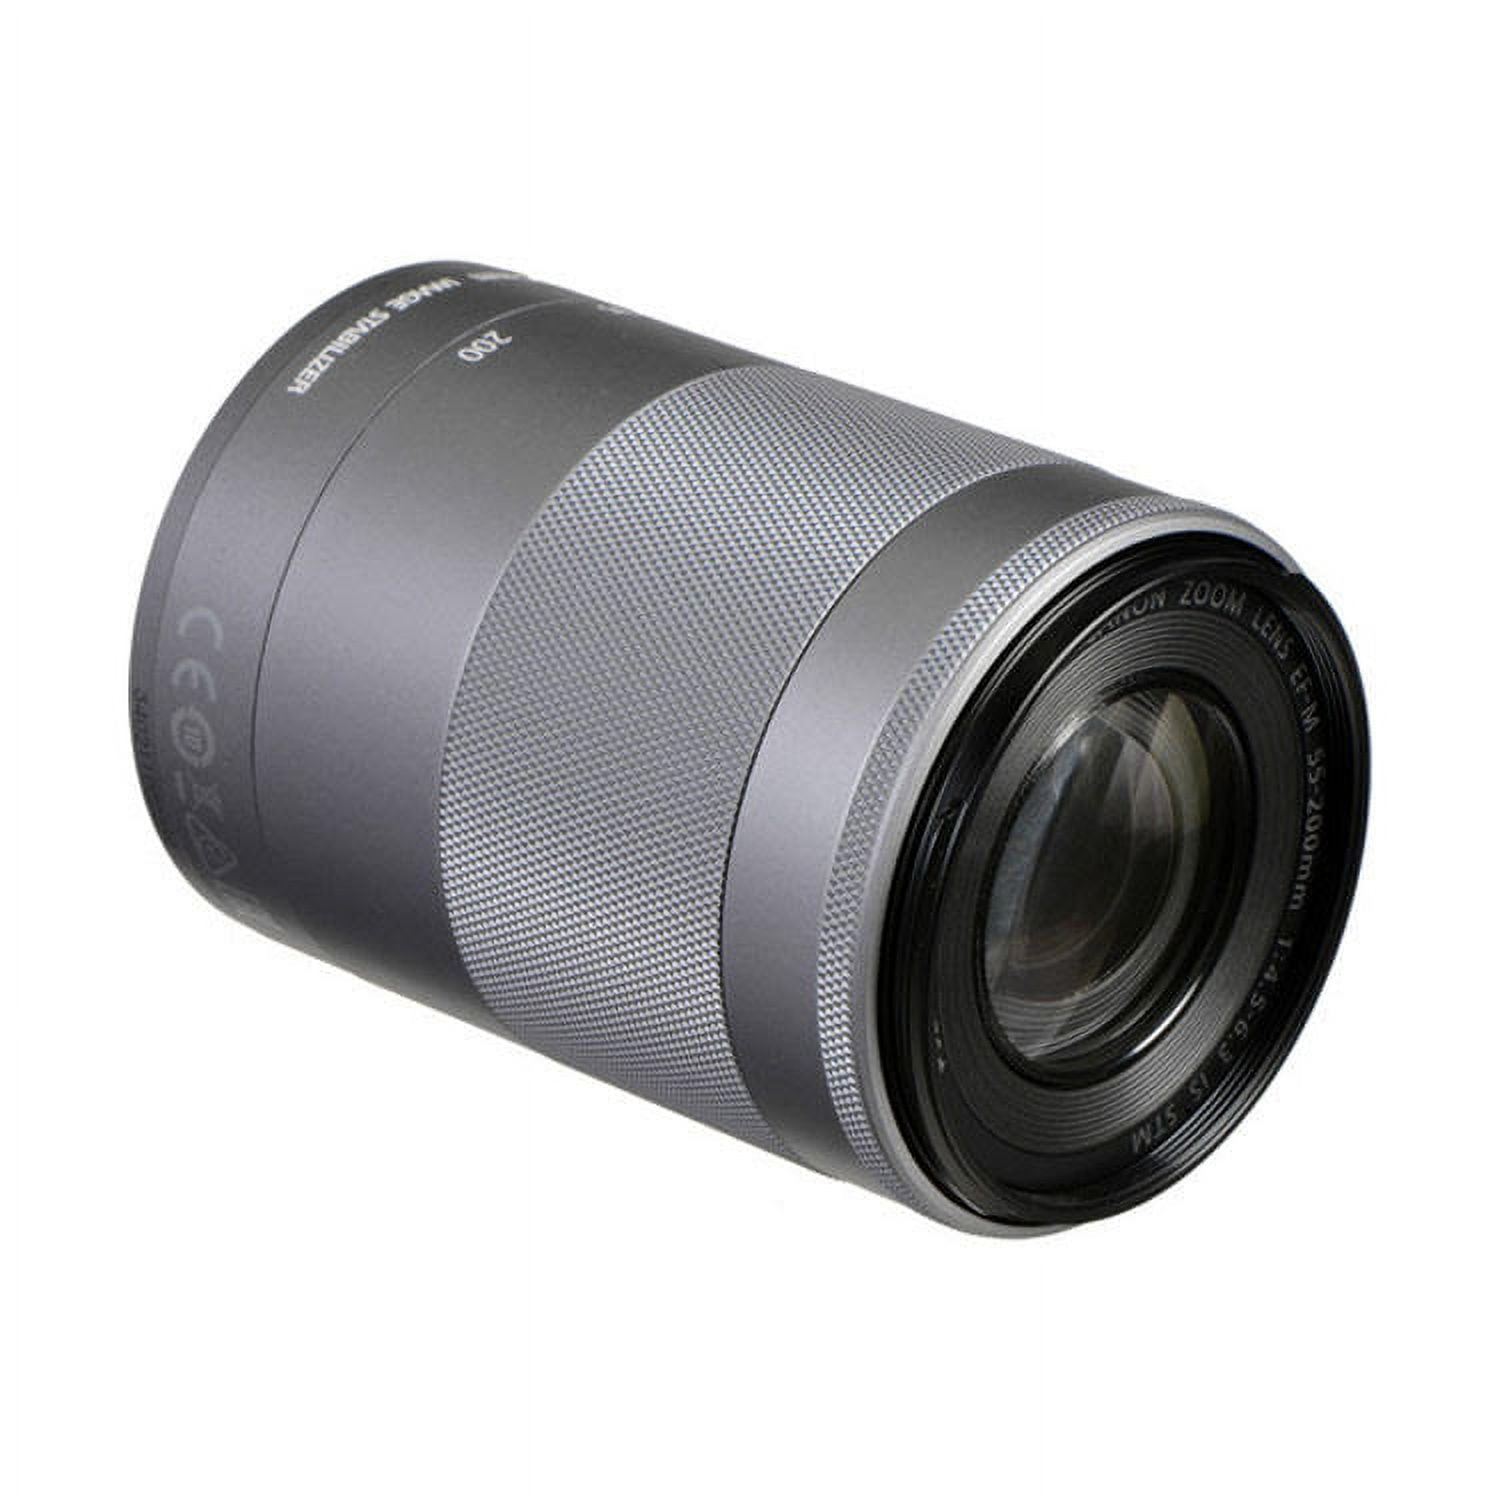 Canon EF-M 55-200mm f/4.5-6.3 IS STM Lens (Silver) + Hood 